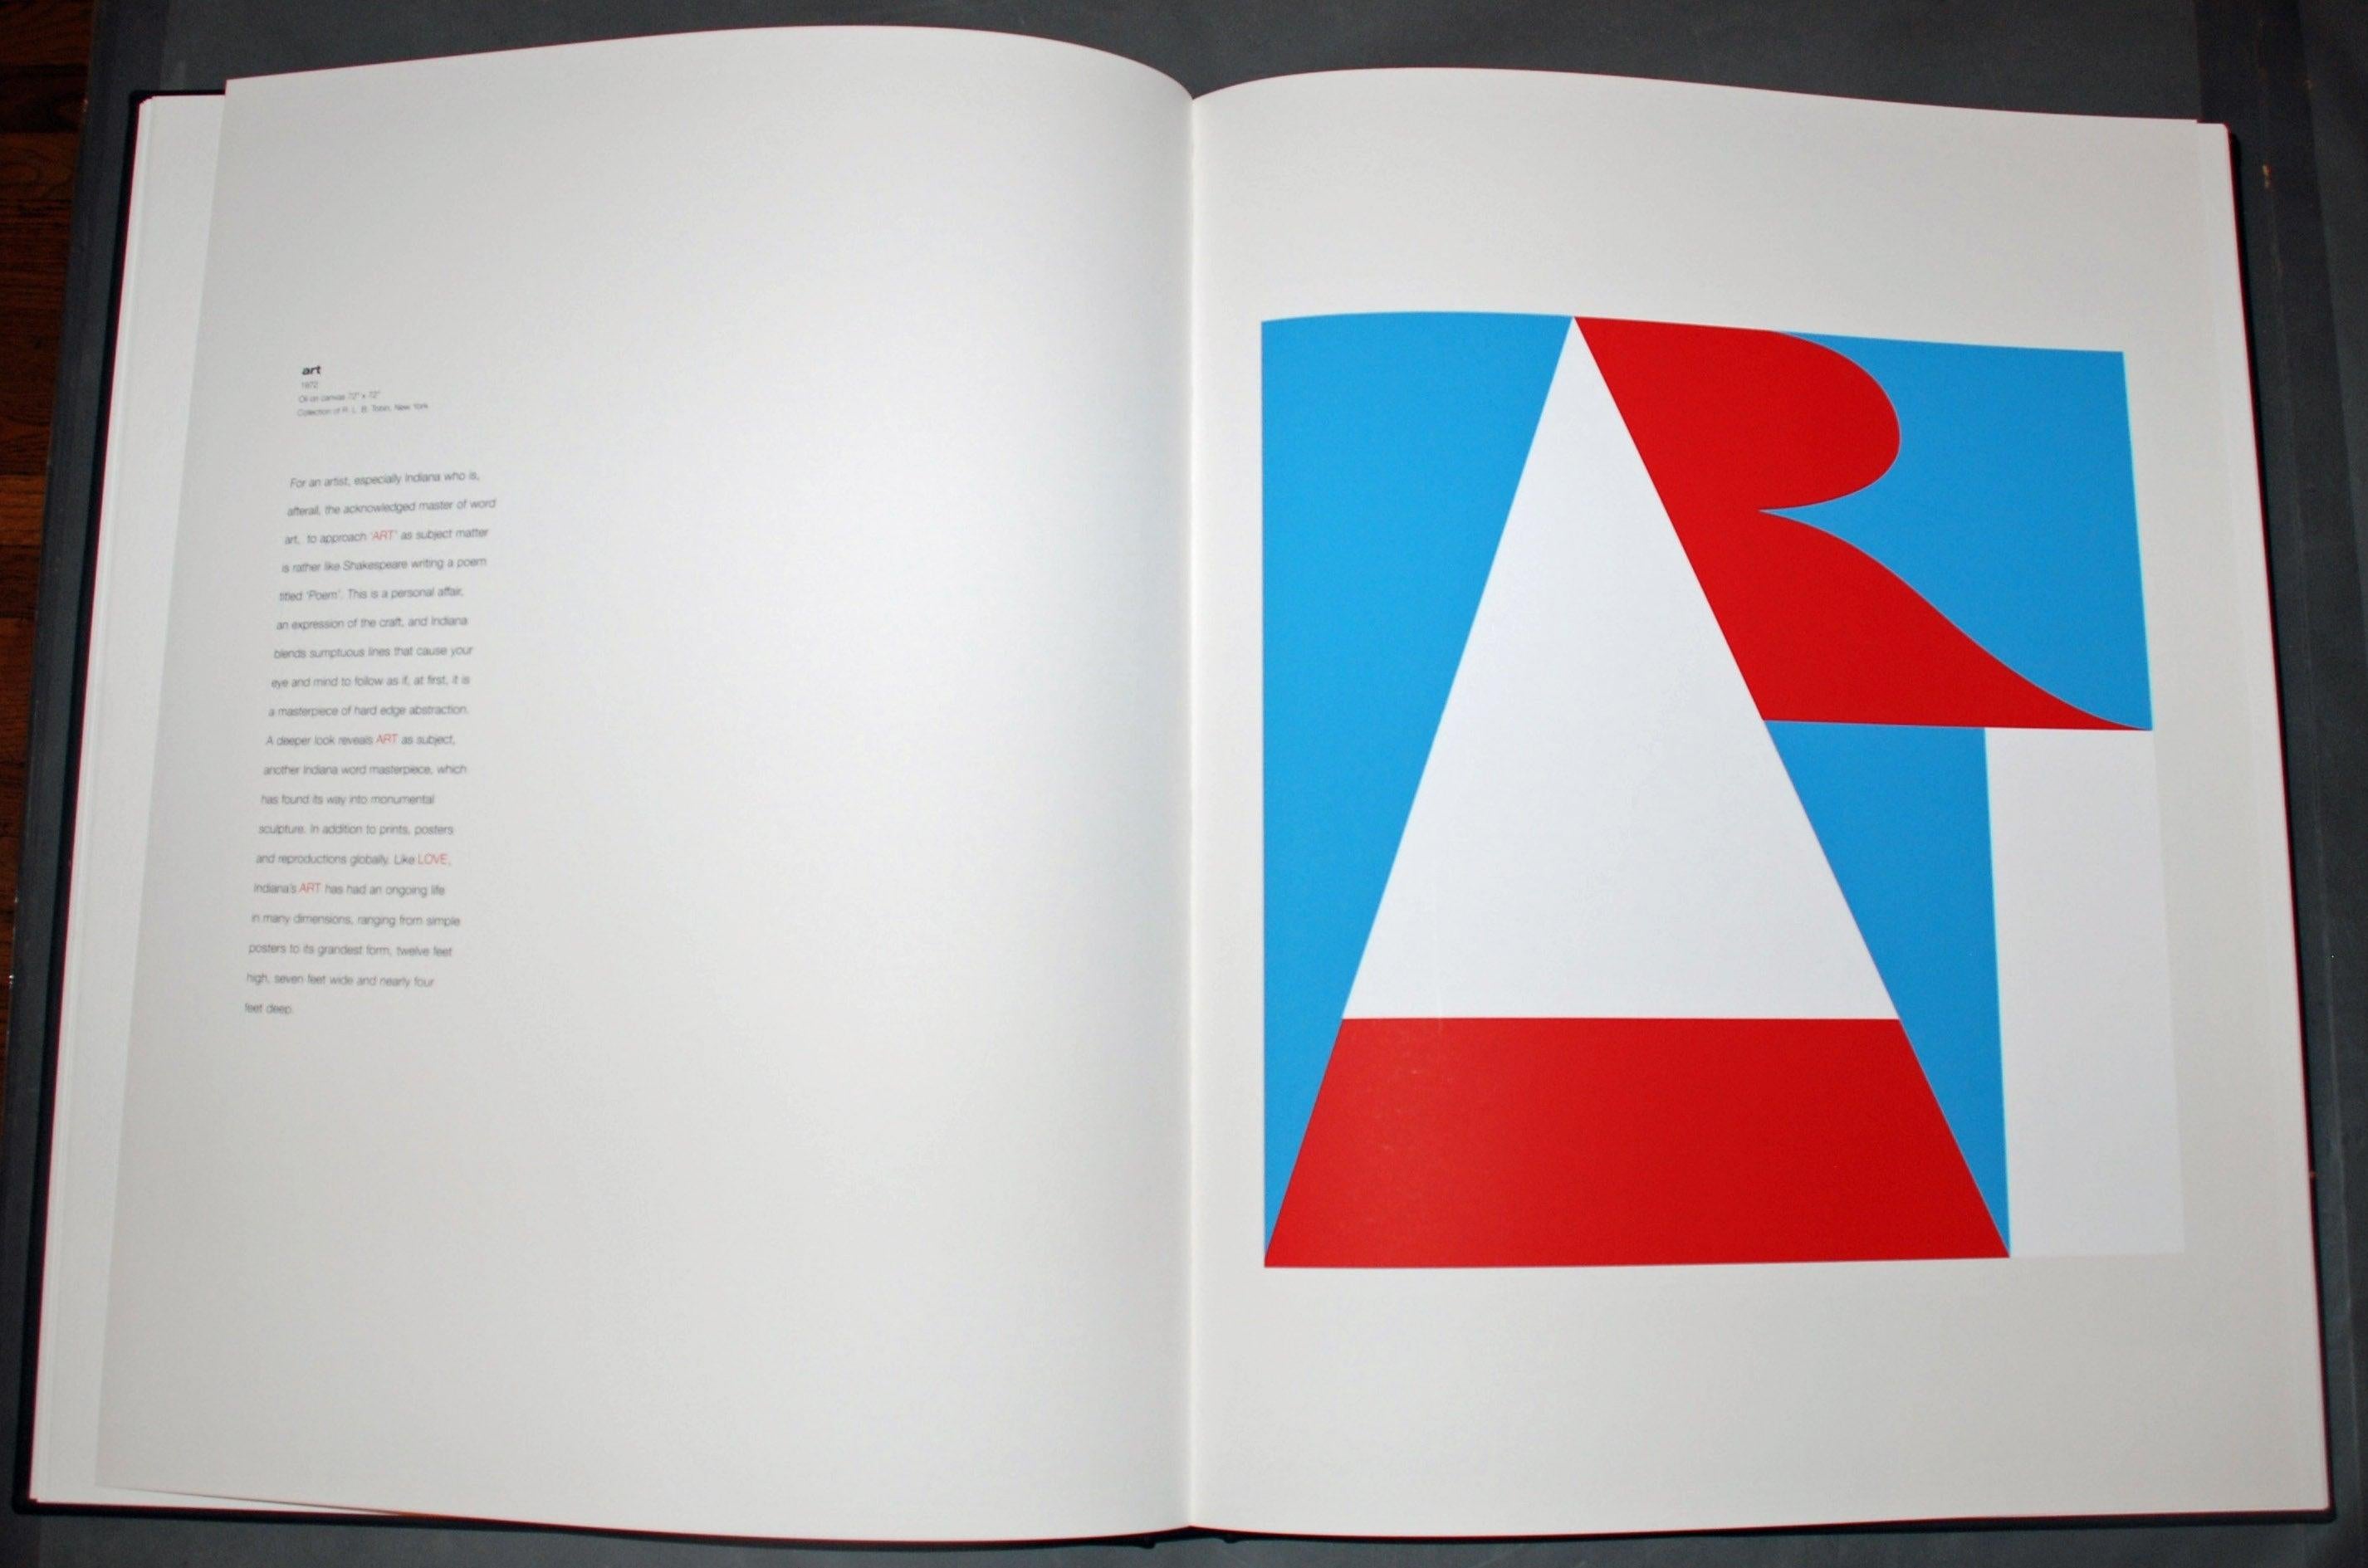 Art, from The American Dream - Abstract Print by Robert Indiana